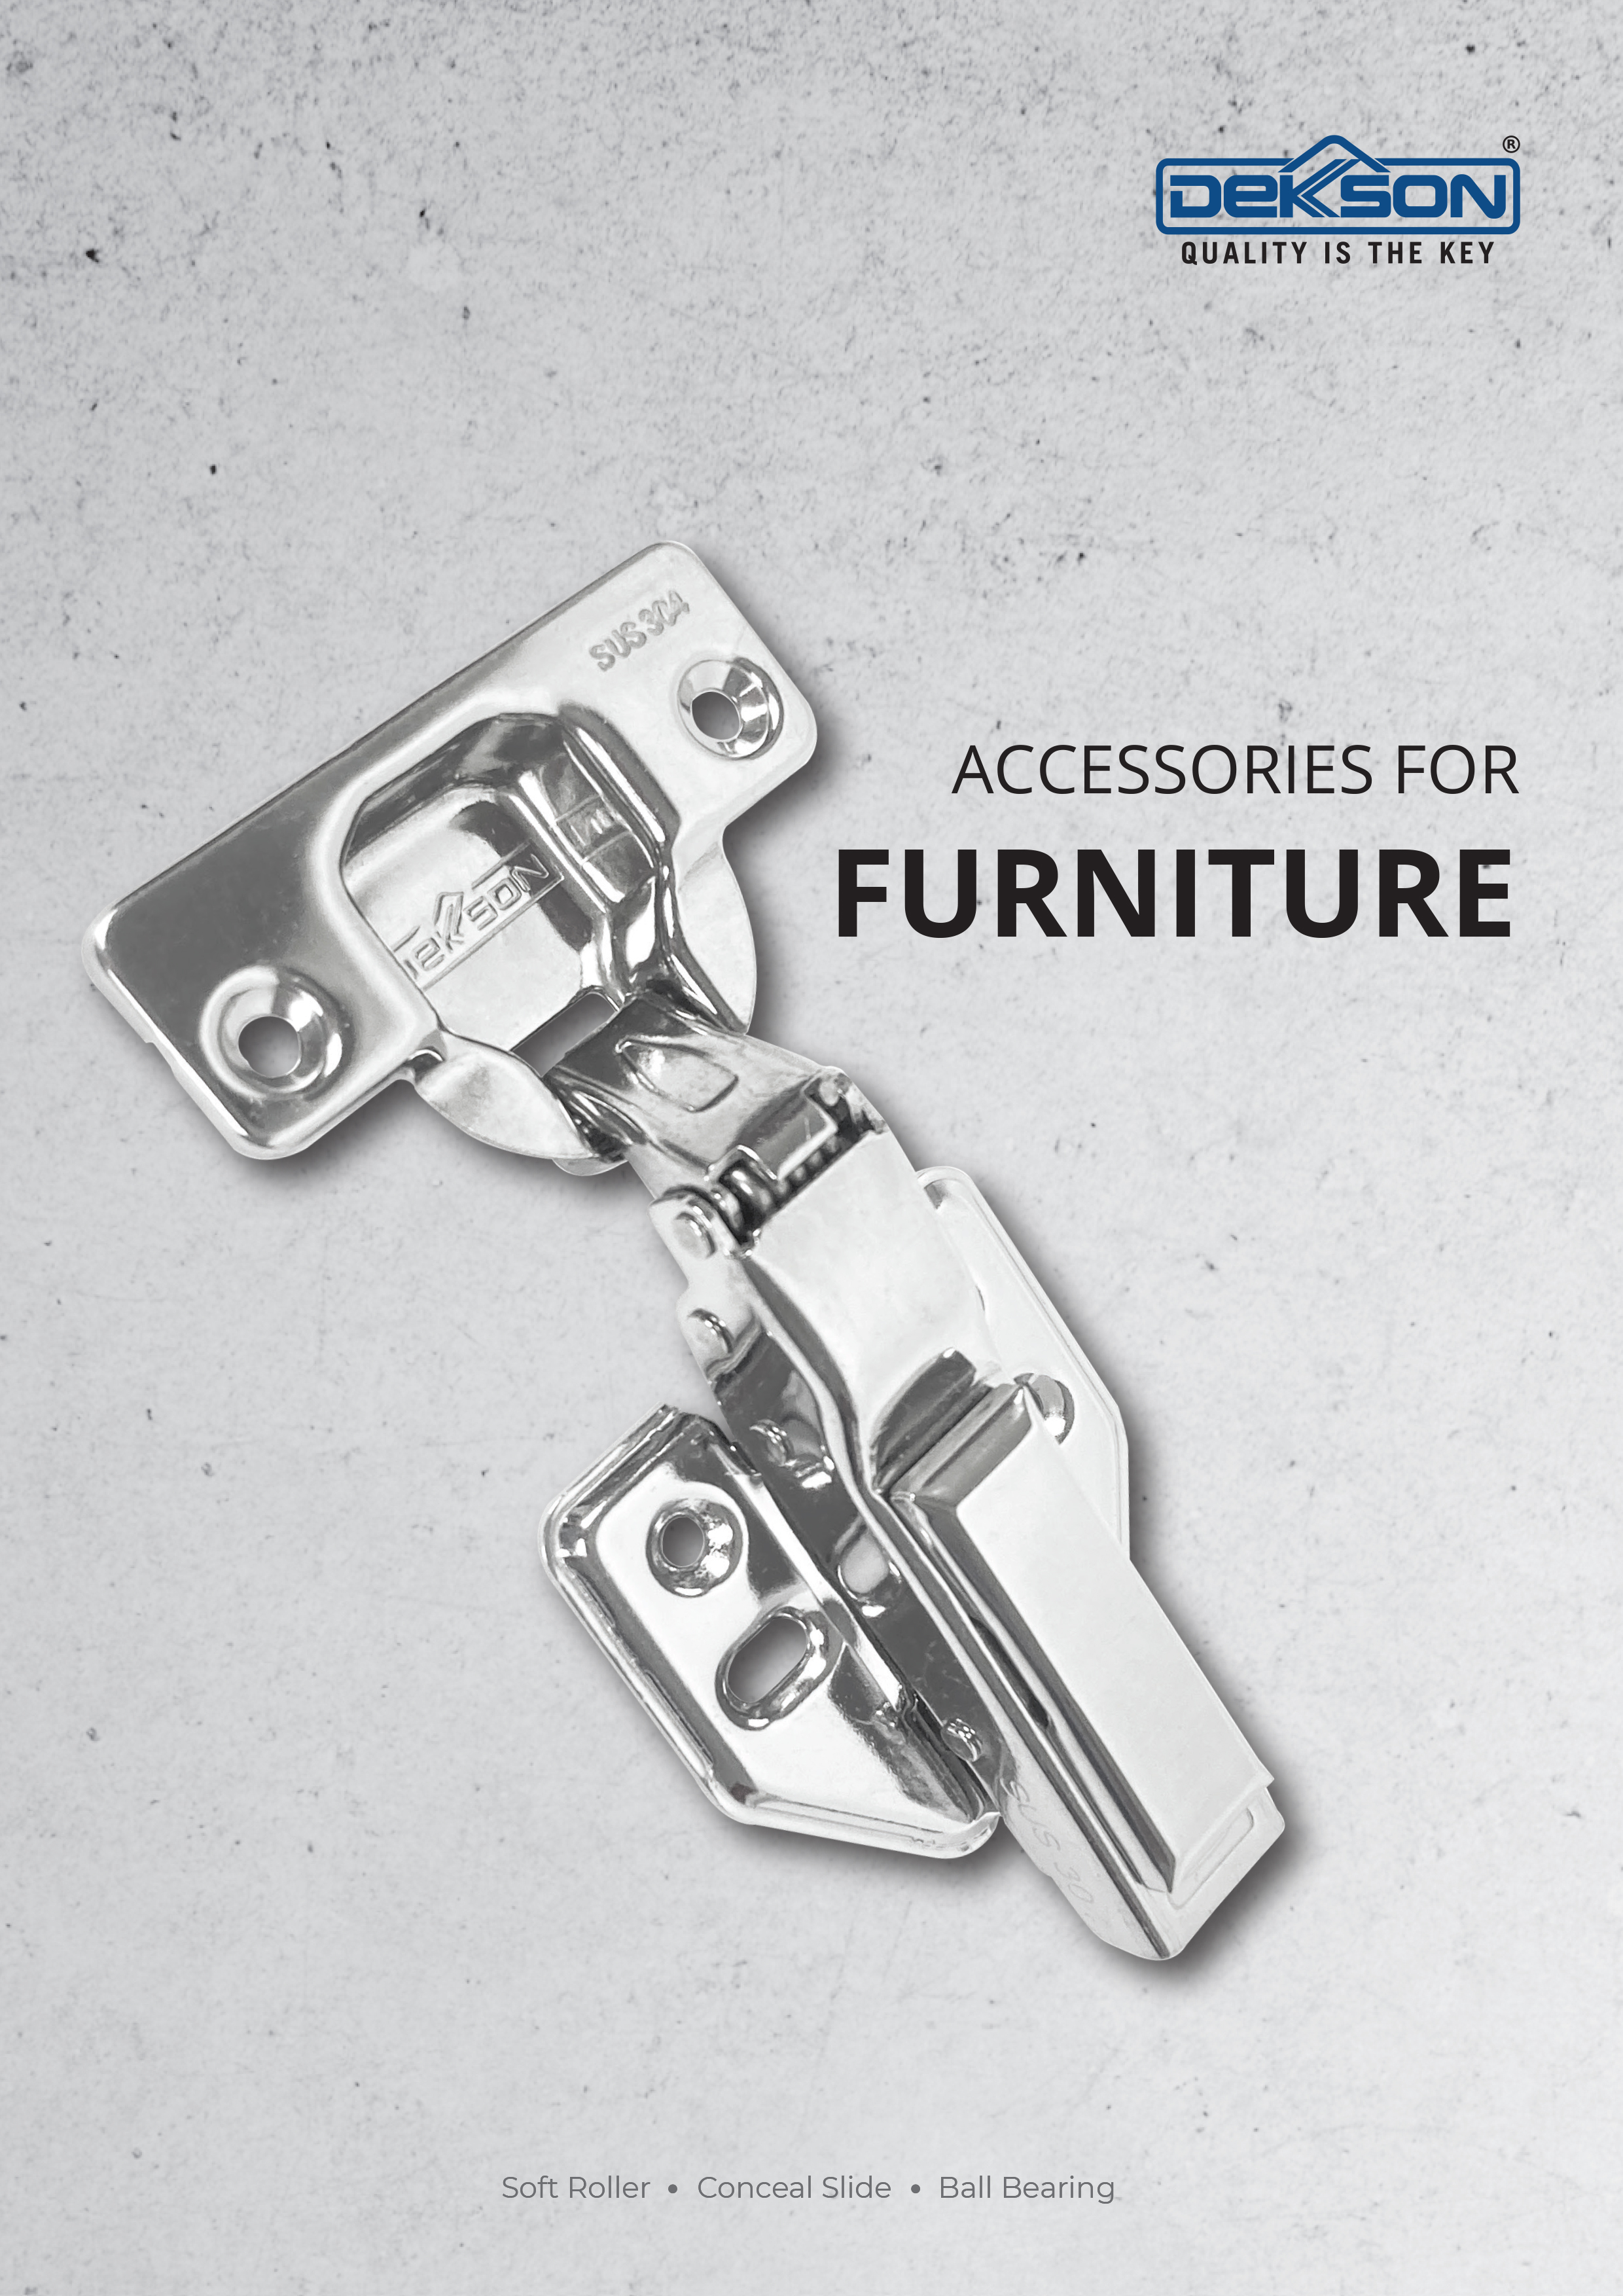 Accessories for Furniture